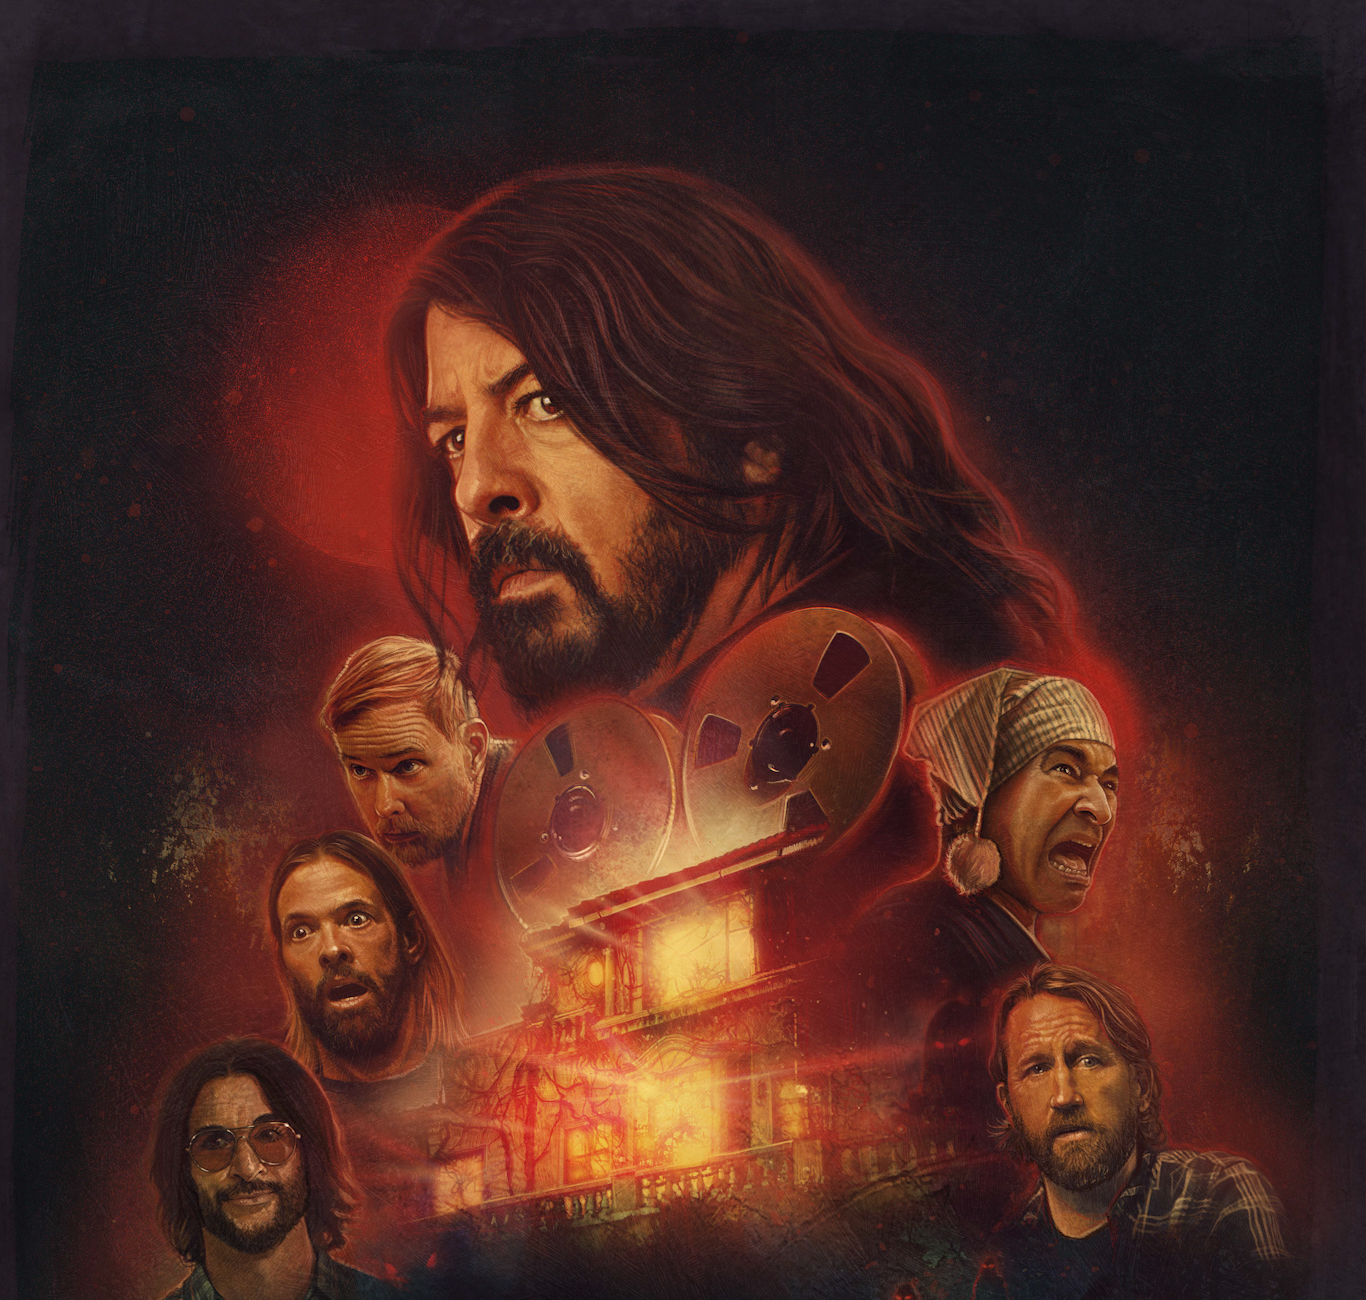 FOO FIGHTERS release the first official trailer for their new horror-comedy film STUDIO 666 